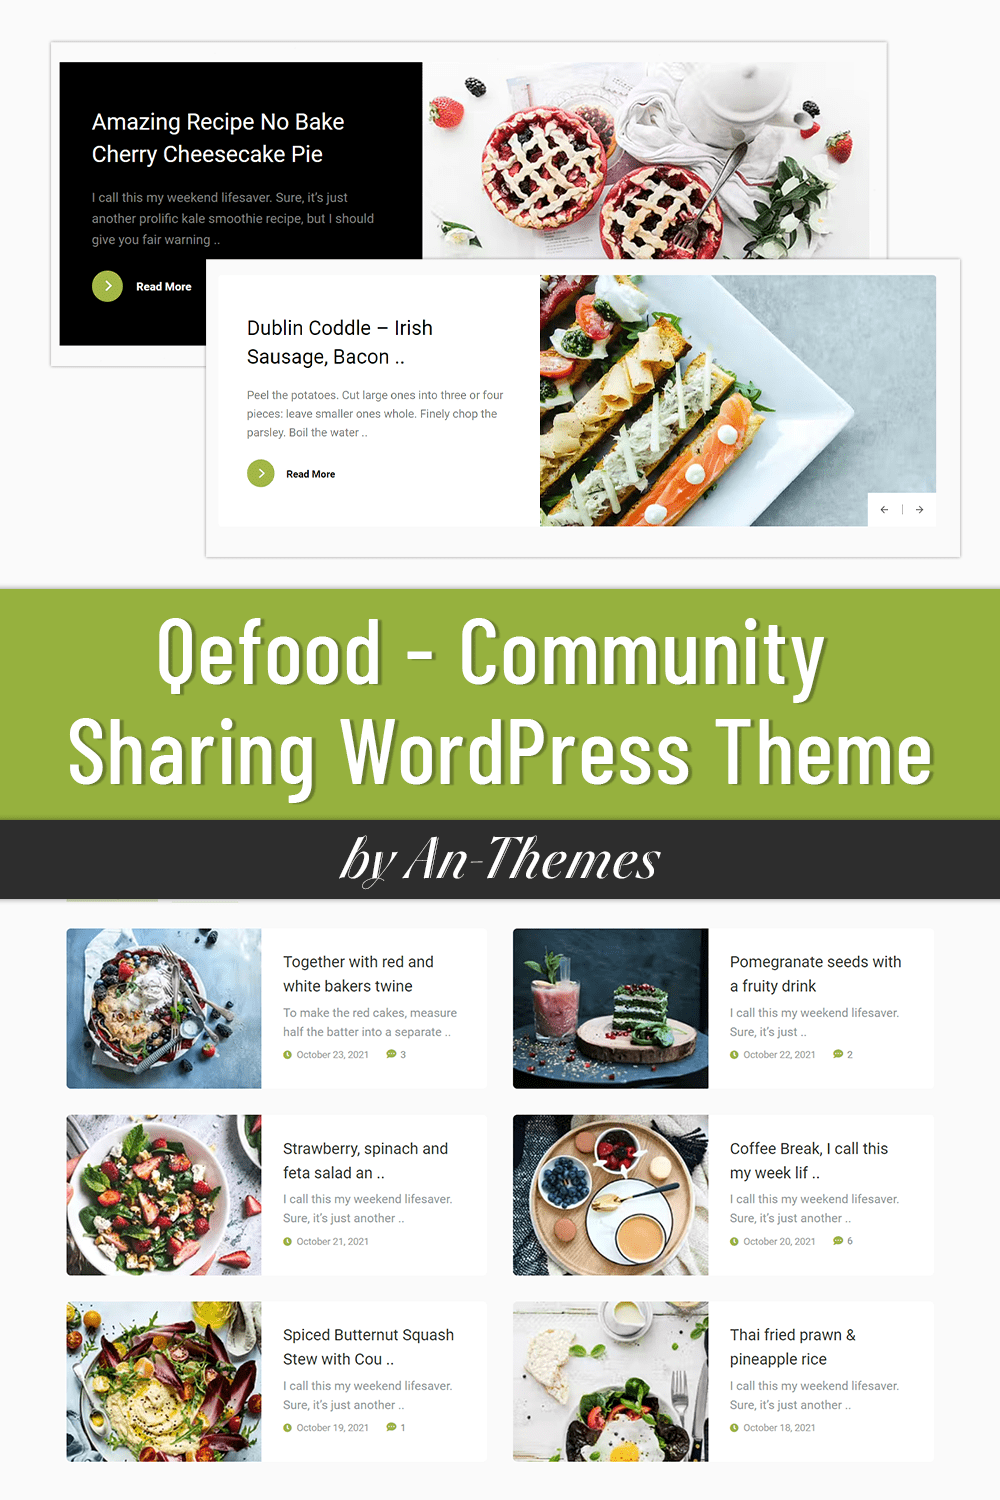 Qefood - Community Sharing WorldPress Theme, picture for pinterest 1000x1500.